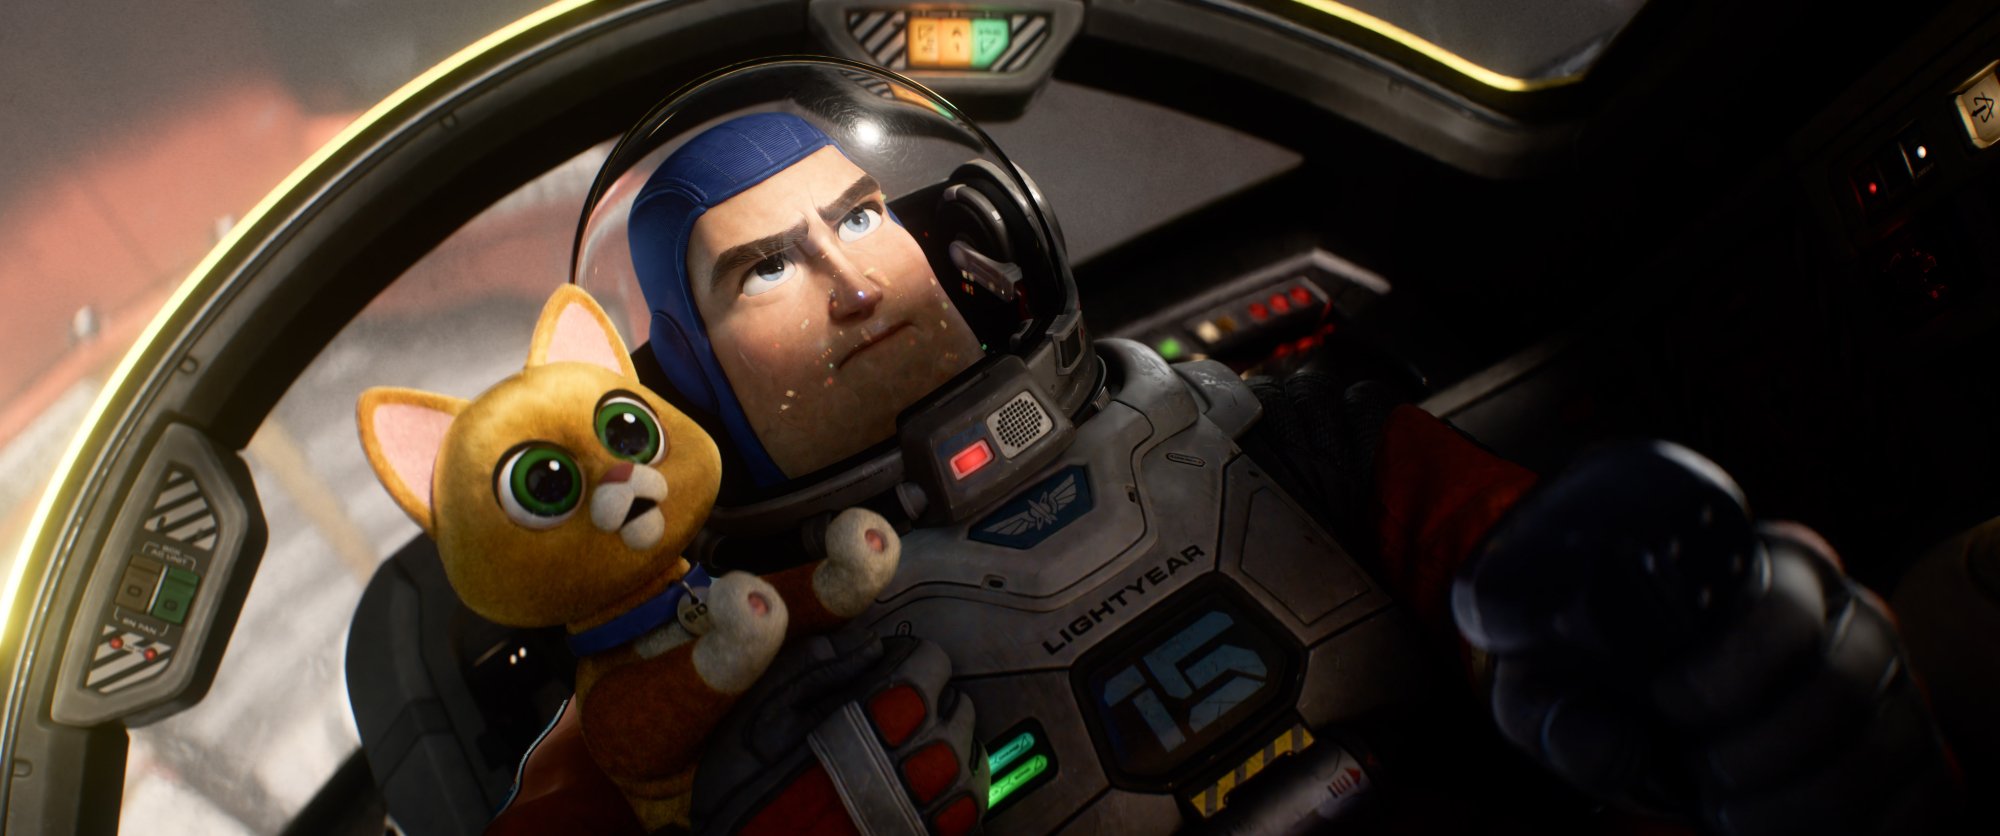 'Lightyear' Sox (voiced by Peter Sohn) and Buzz Lightyear (voiced by Chris Evans) looking determined in the cockpit of a jet